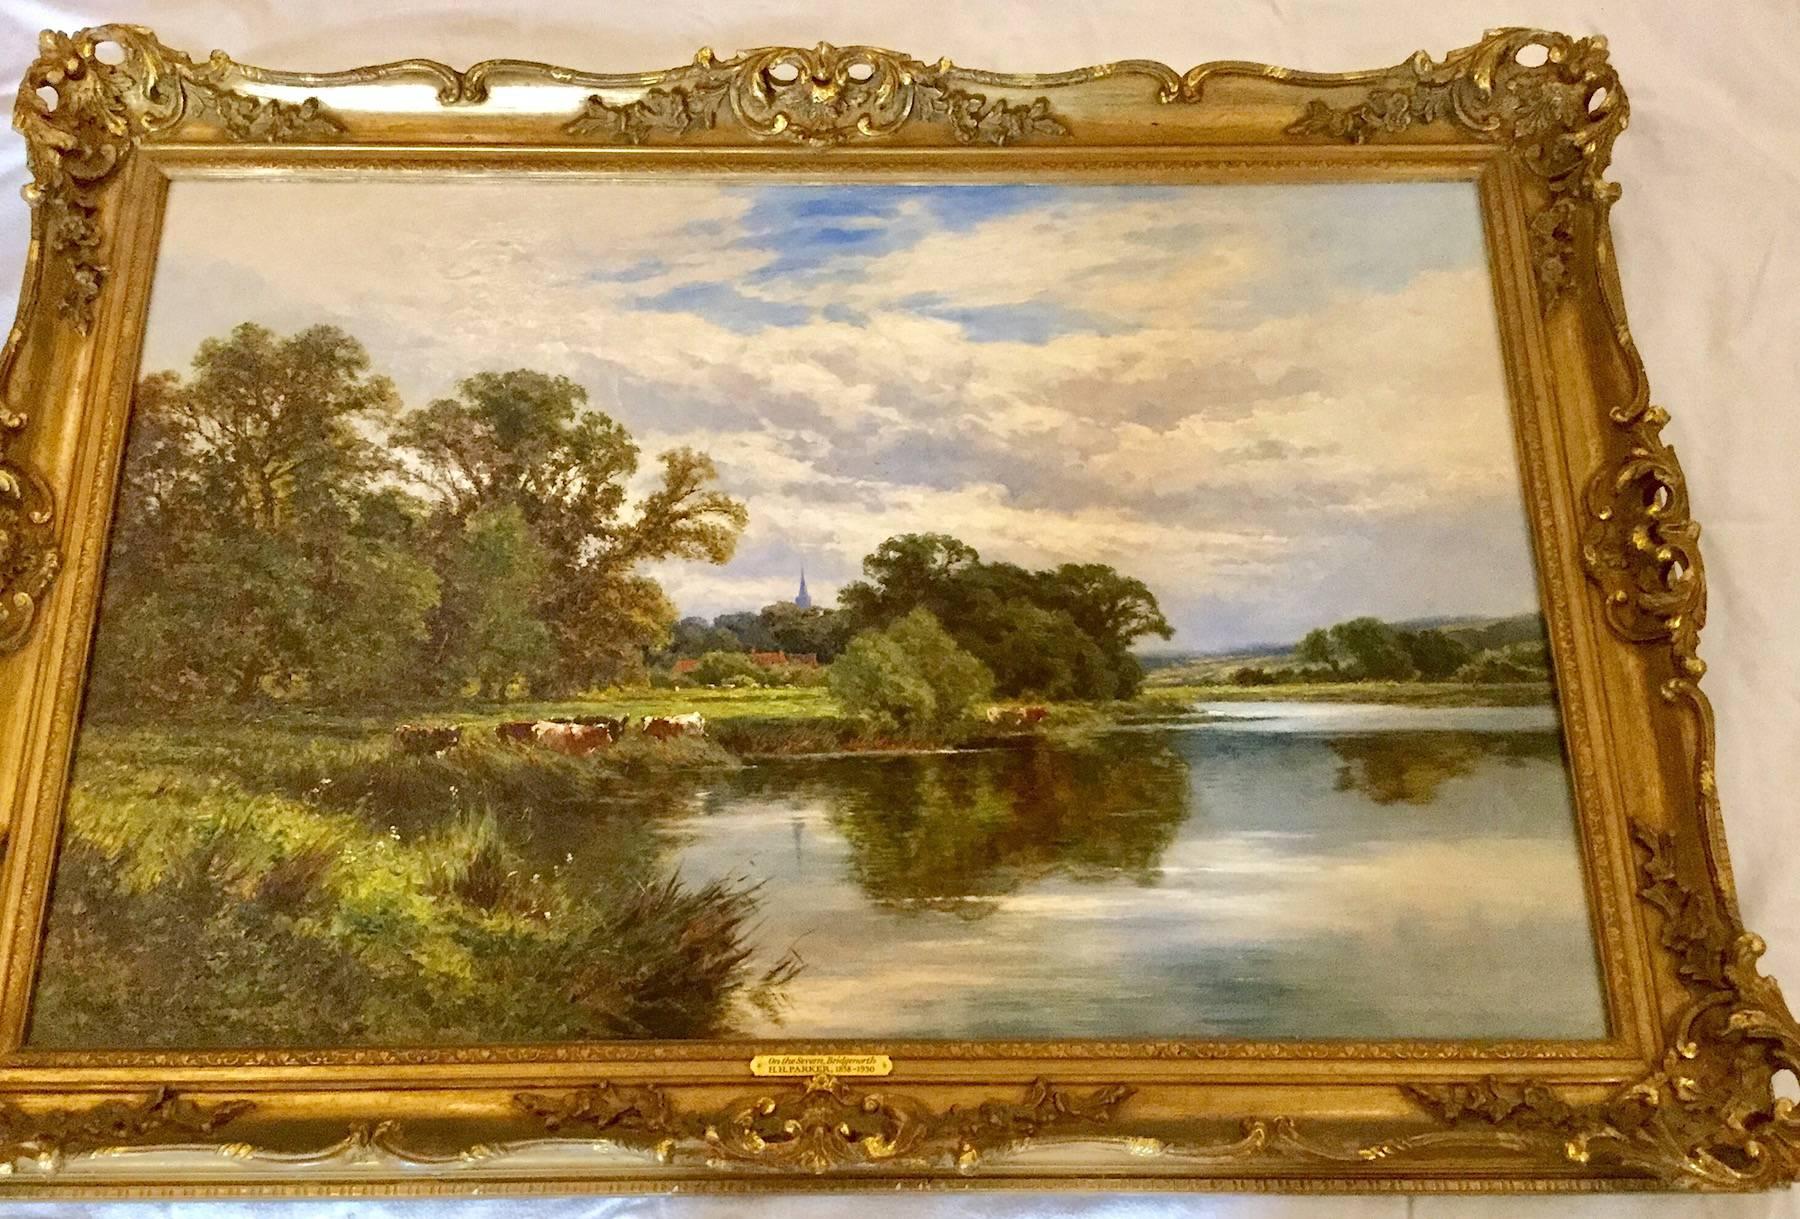 On the River Severn at Bridgnorth An English Landscape 18th / 19th Century  - Painting by Henry H. Parker